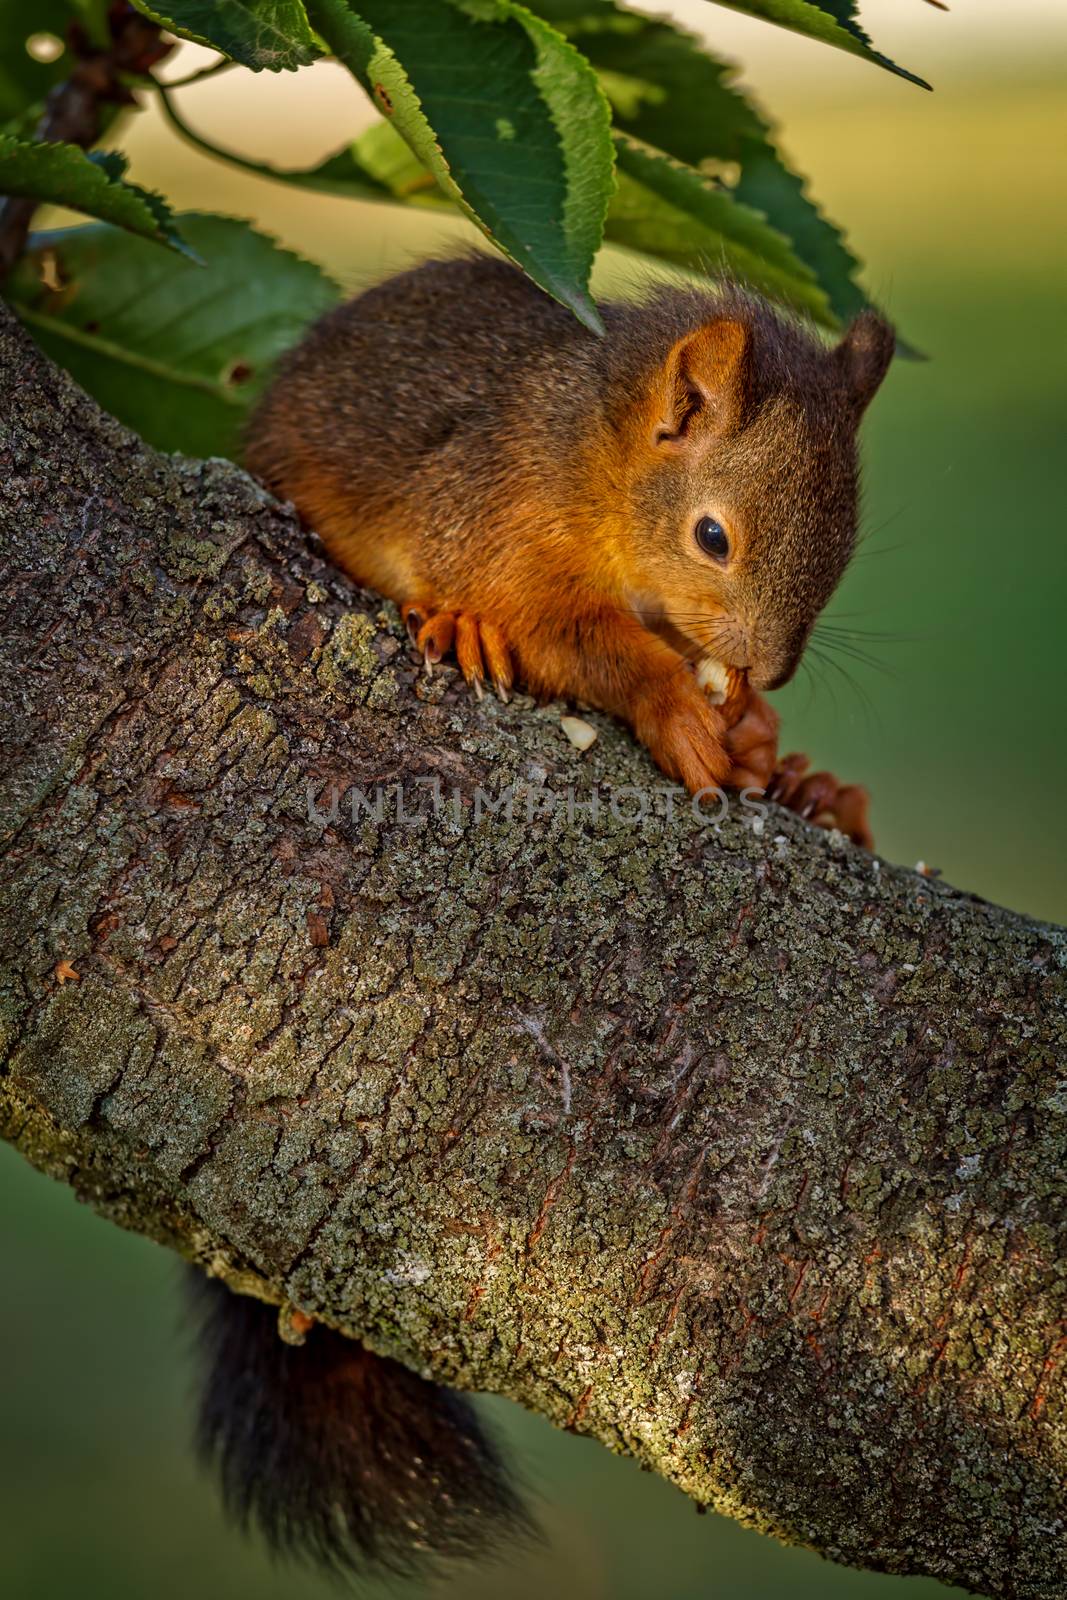 Red squirrel standing on the tree and eating